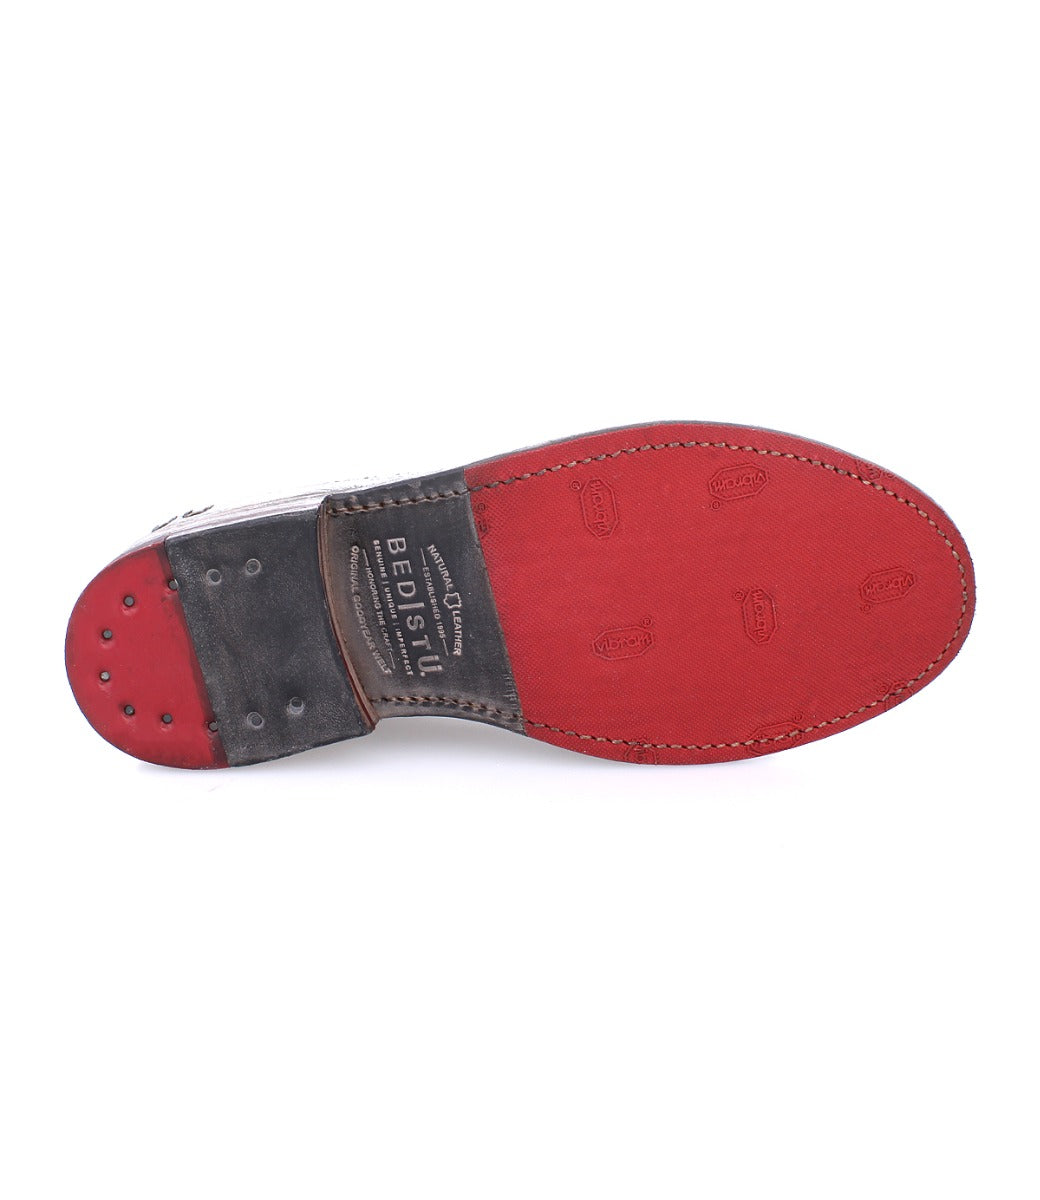 A women's shoe with a Lita K II and Bed Stu sole.